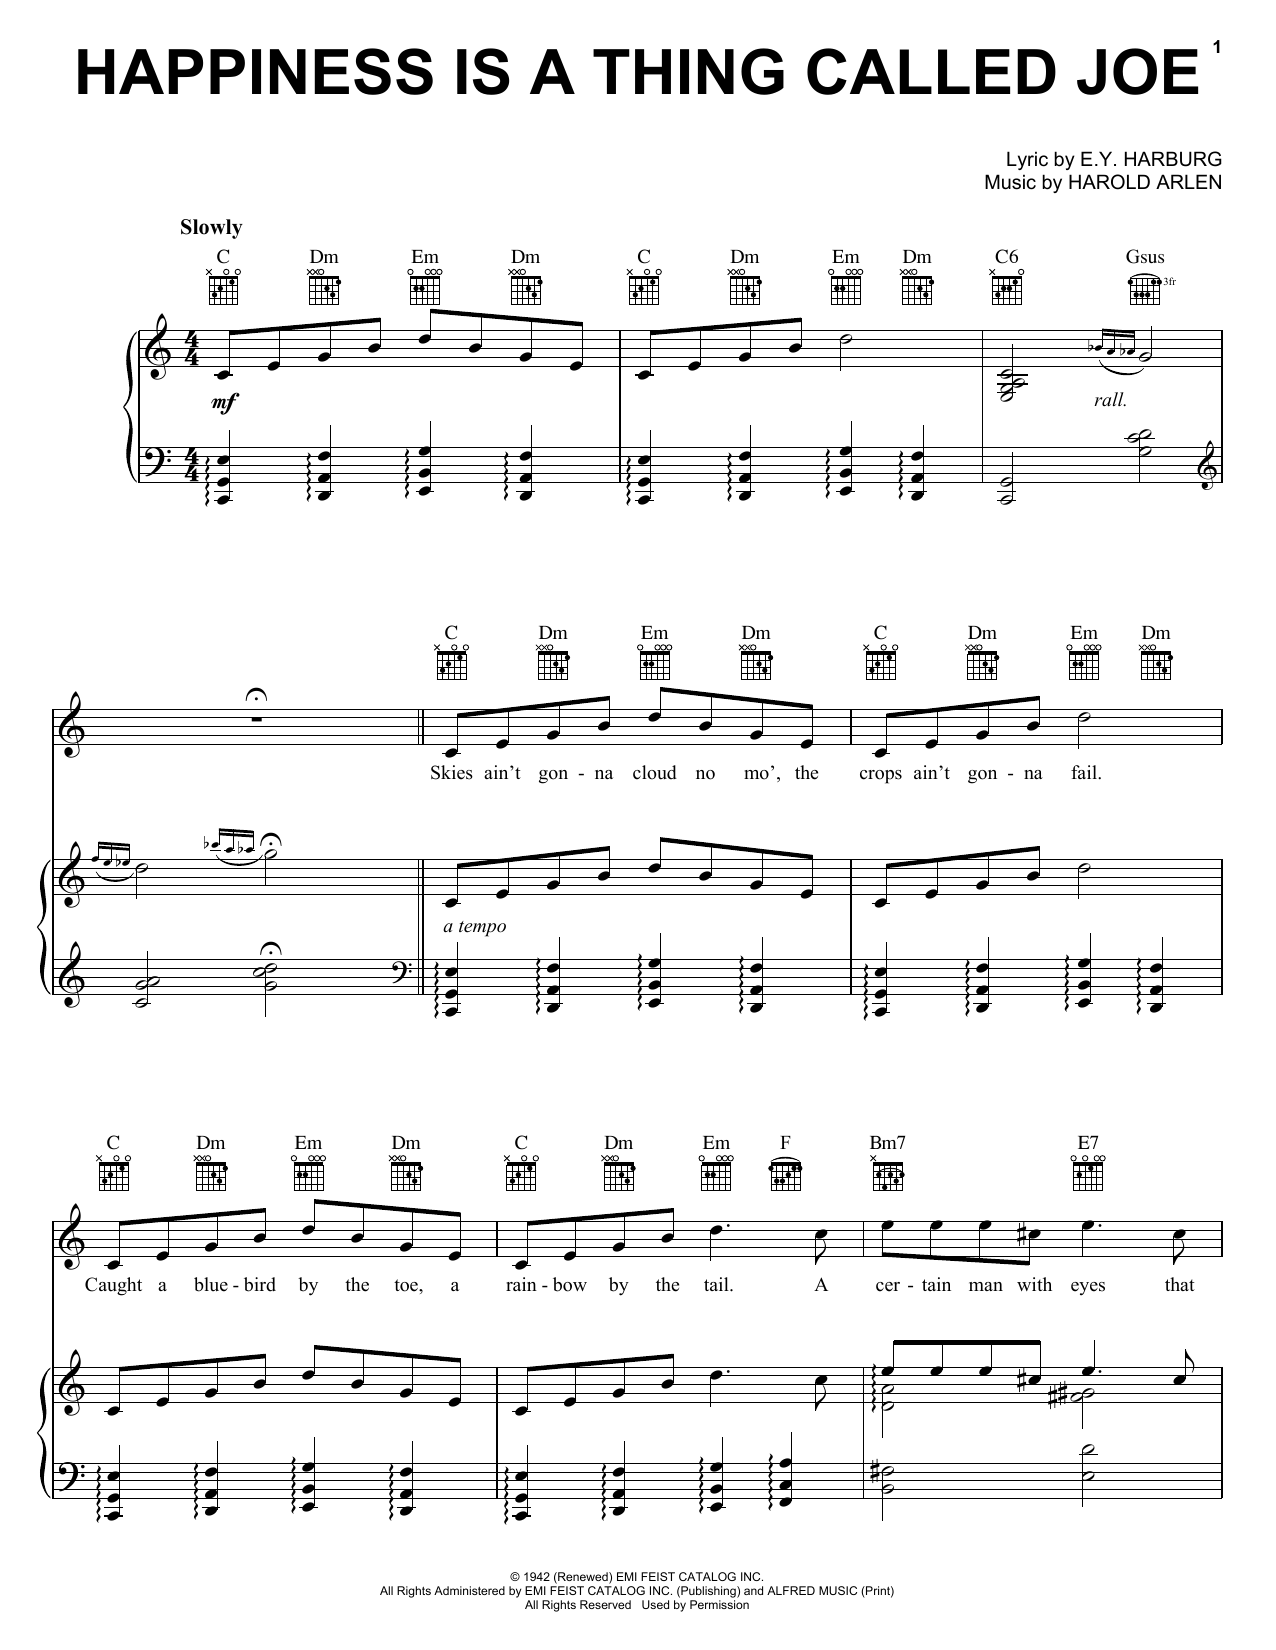 E.Y. Harburg Happiness Is A Thing Called Joe sheet music notes and chords. Download Printable PDF.